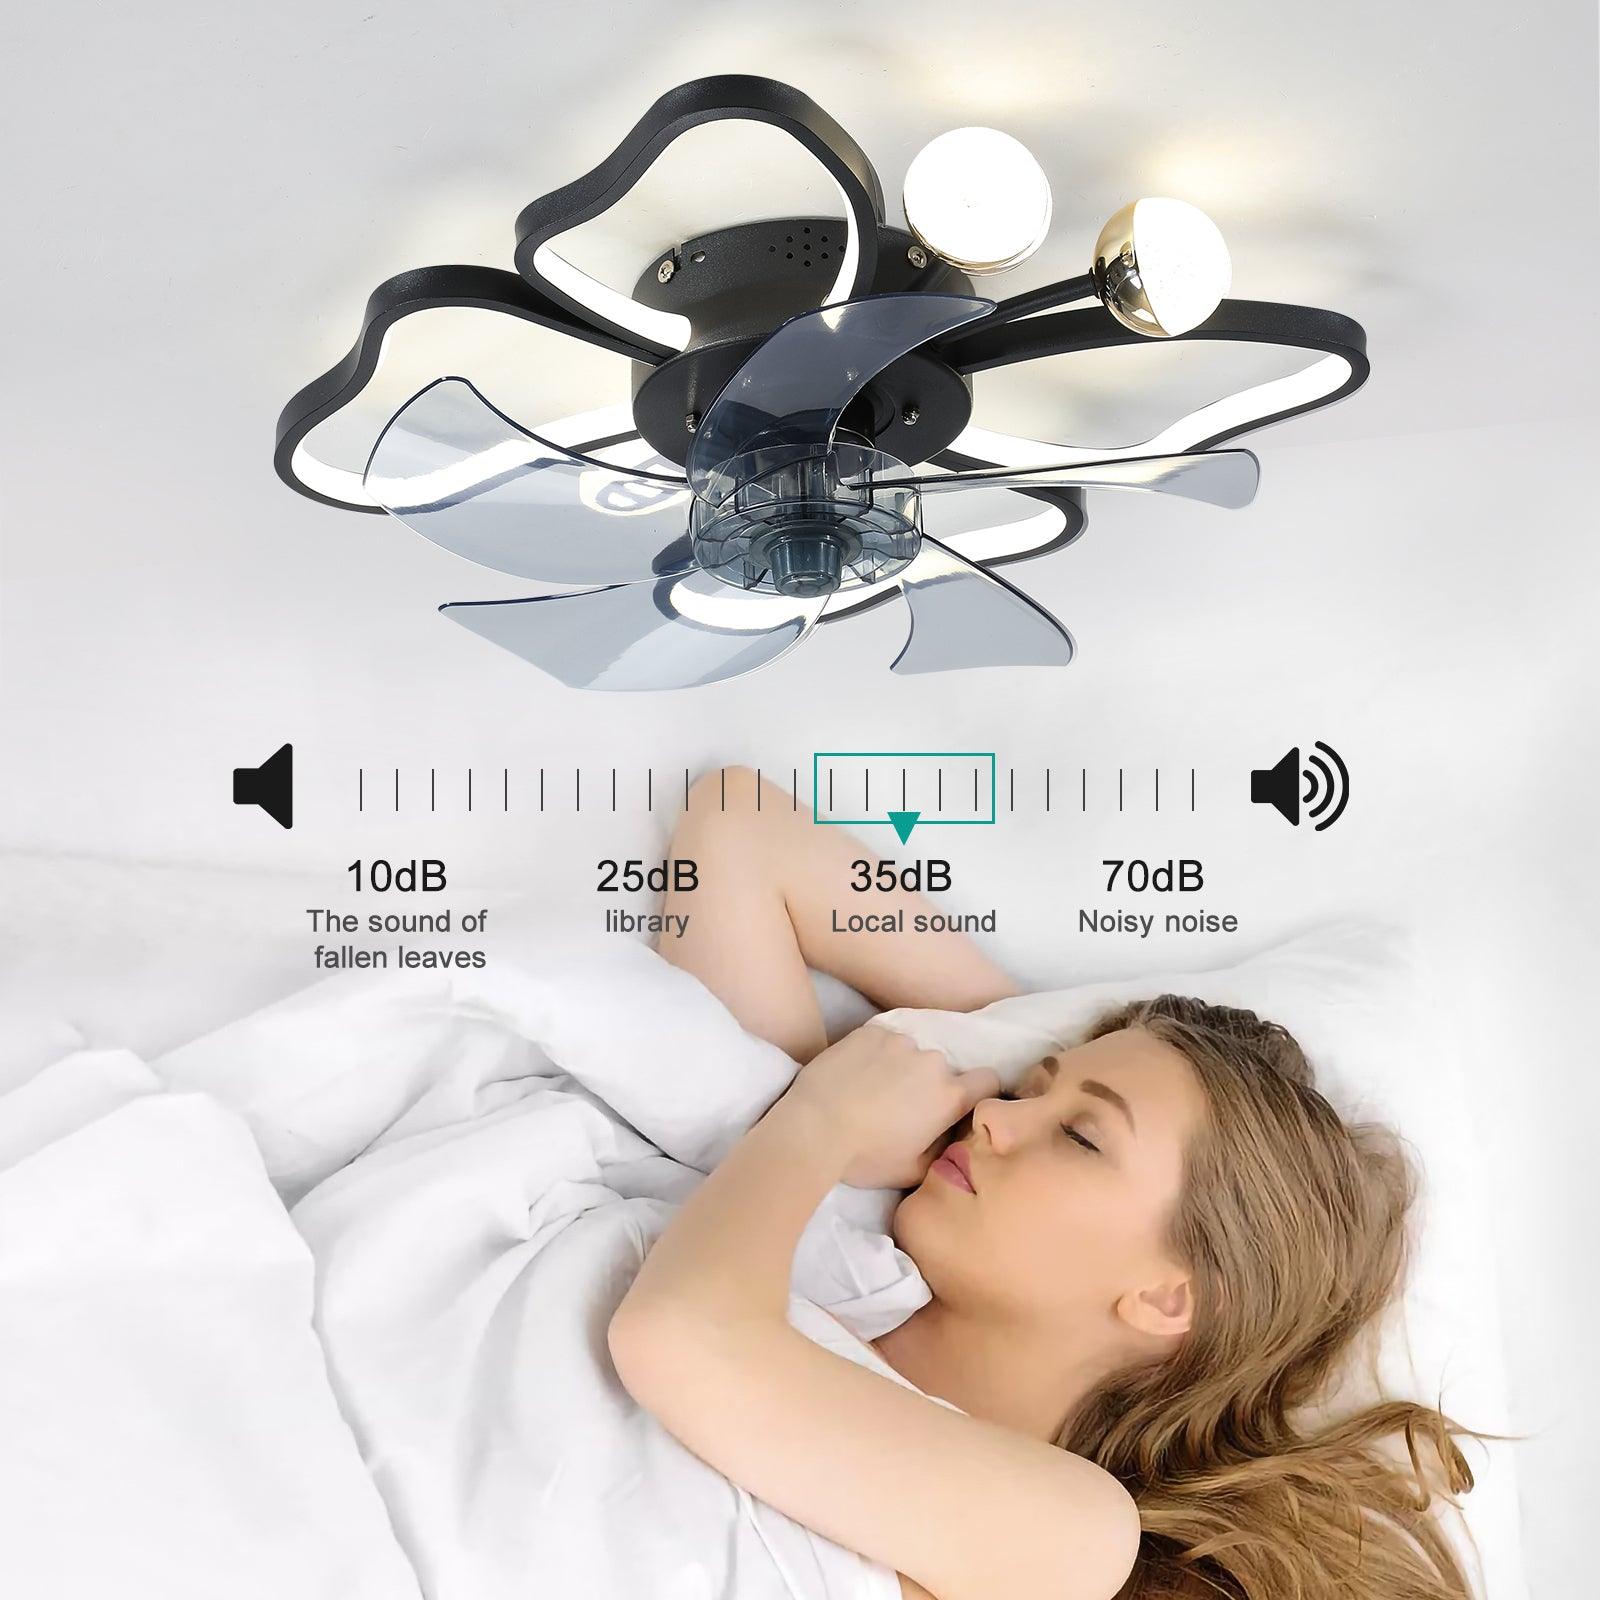 🆓🚛 19.7 Inch Light Ceiling Fan With Lights Remote Control With Modern Butterfly Design Styling, Black, Fan for Bedroom, Living Room, Timing Function, Noiseless, Children'S Favorite